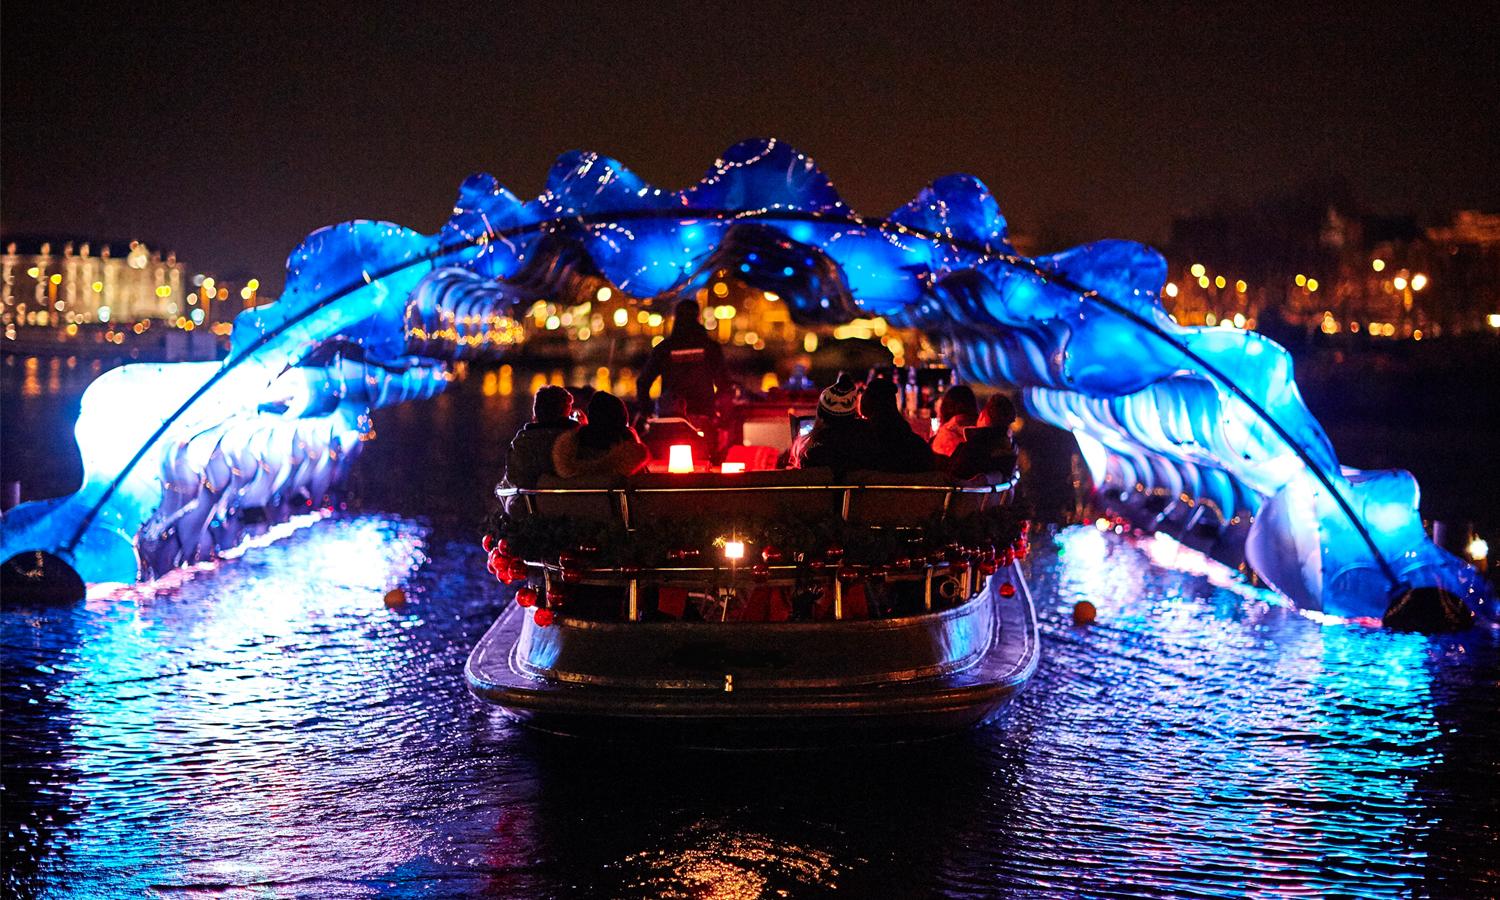 People in a boat, cruising underneath the colourful artwork